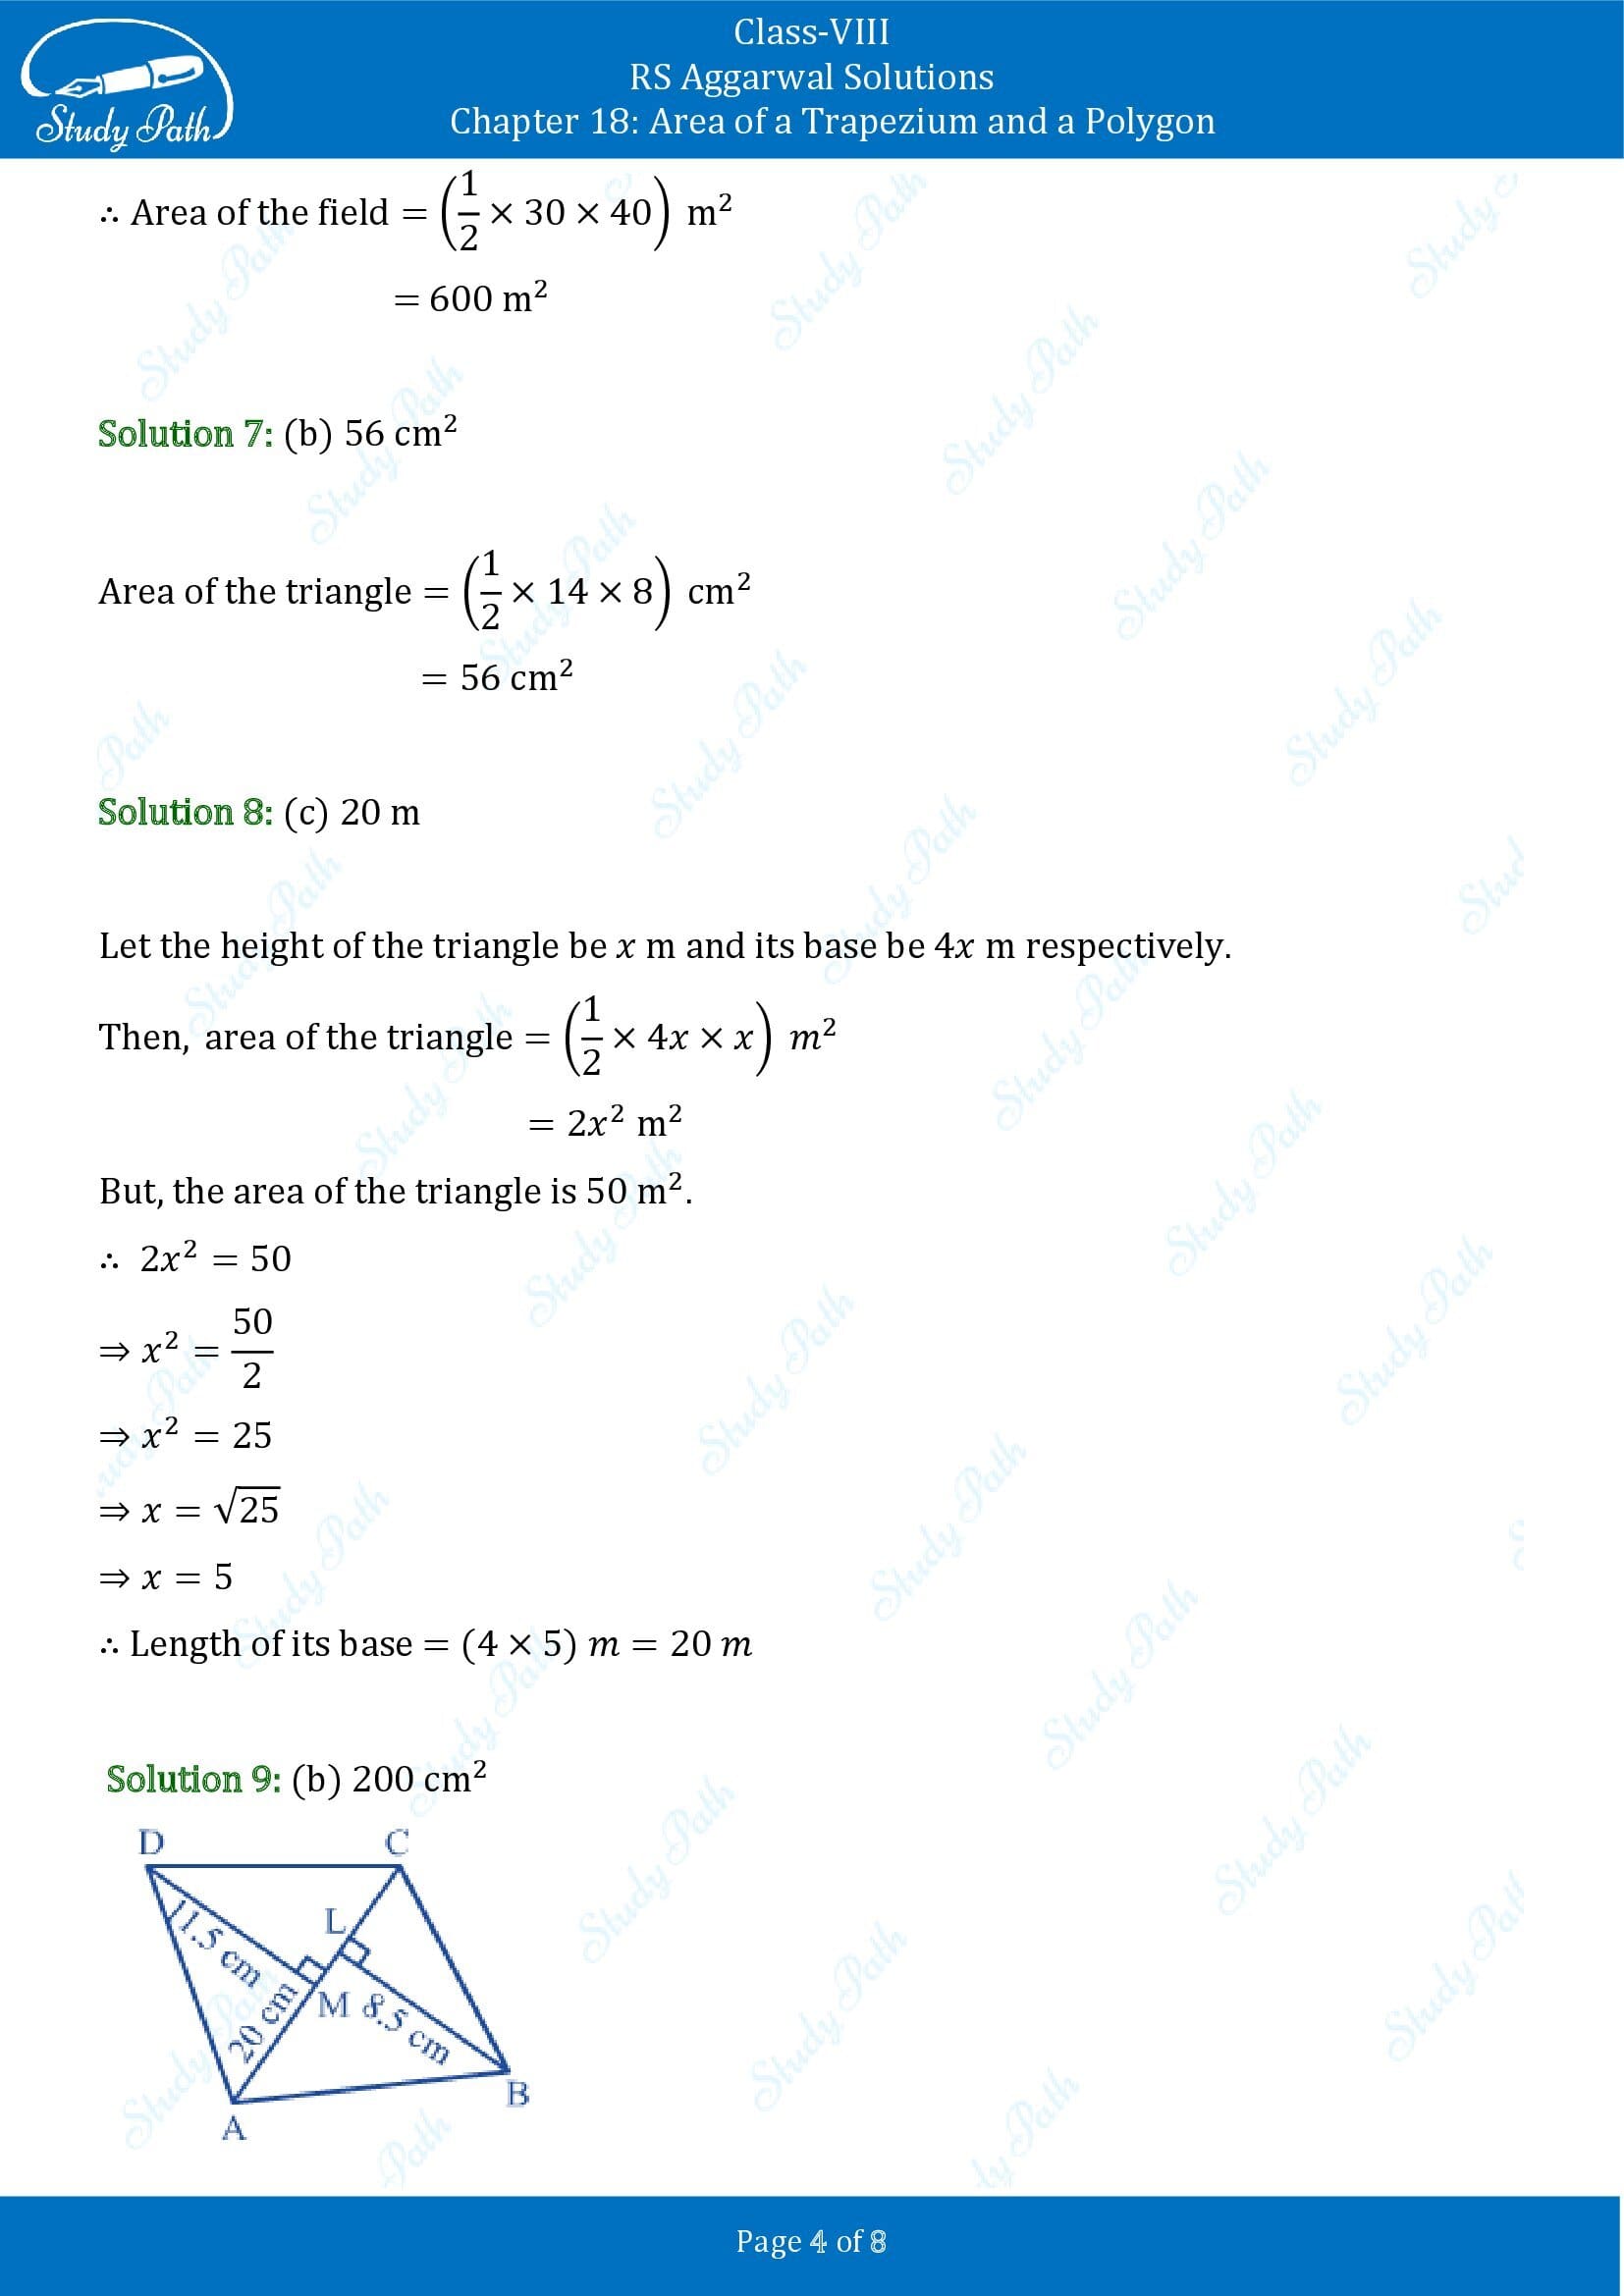 RS Aggarwal Solutions Class 8 Chapter 18 Area of a Trapezium and a Polygon Test Paper 00004